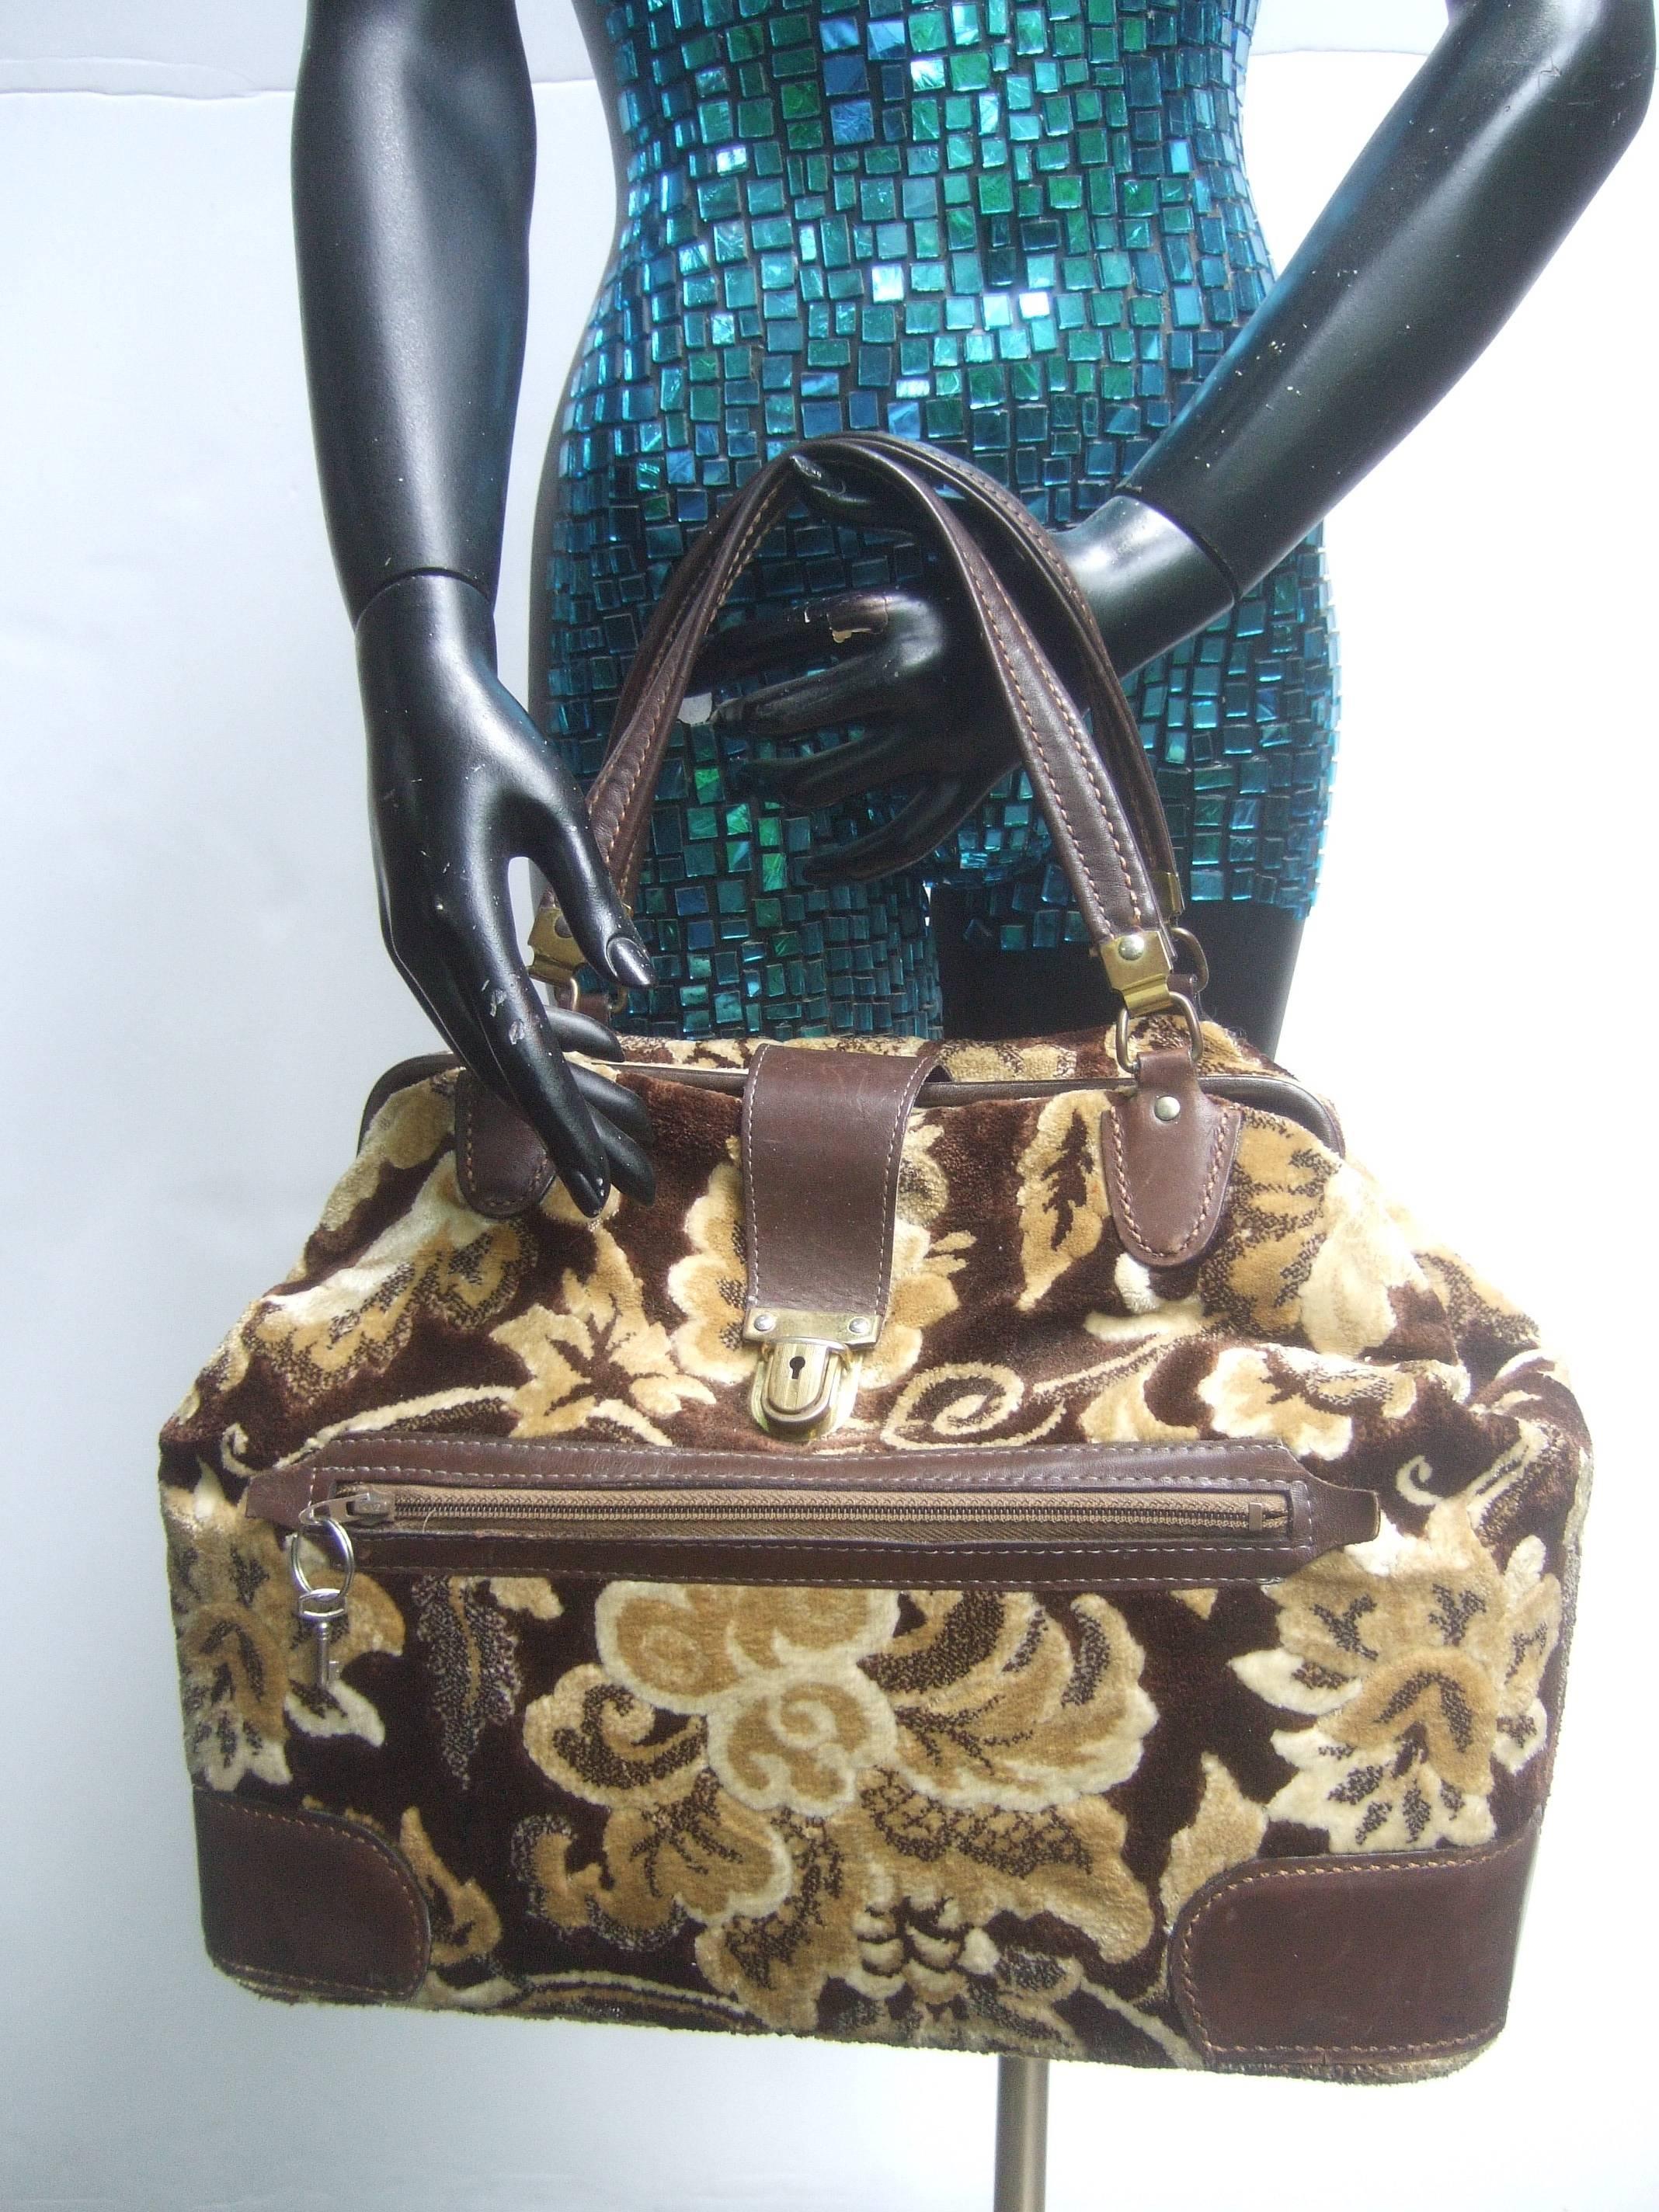 Stylish brocade leather trim travel case c 1970
The luxurious brocade travel case is covered
with autumn foliage in colors that range from 
brown, tan & beige

The twin handles, clasp frame and lower corners
are brown leather with saddle